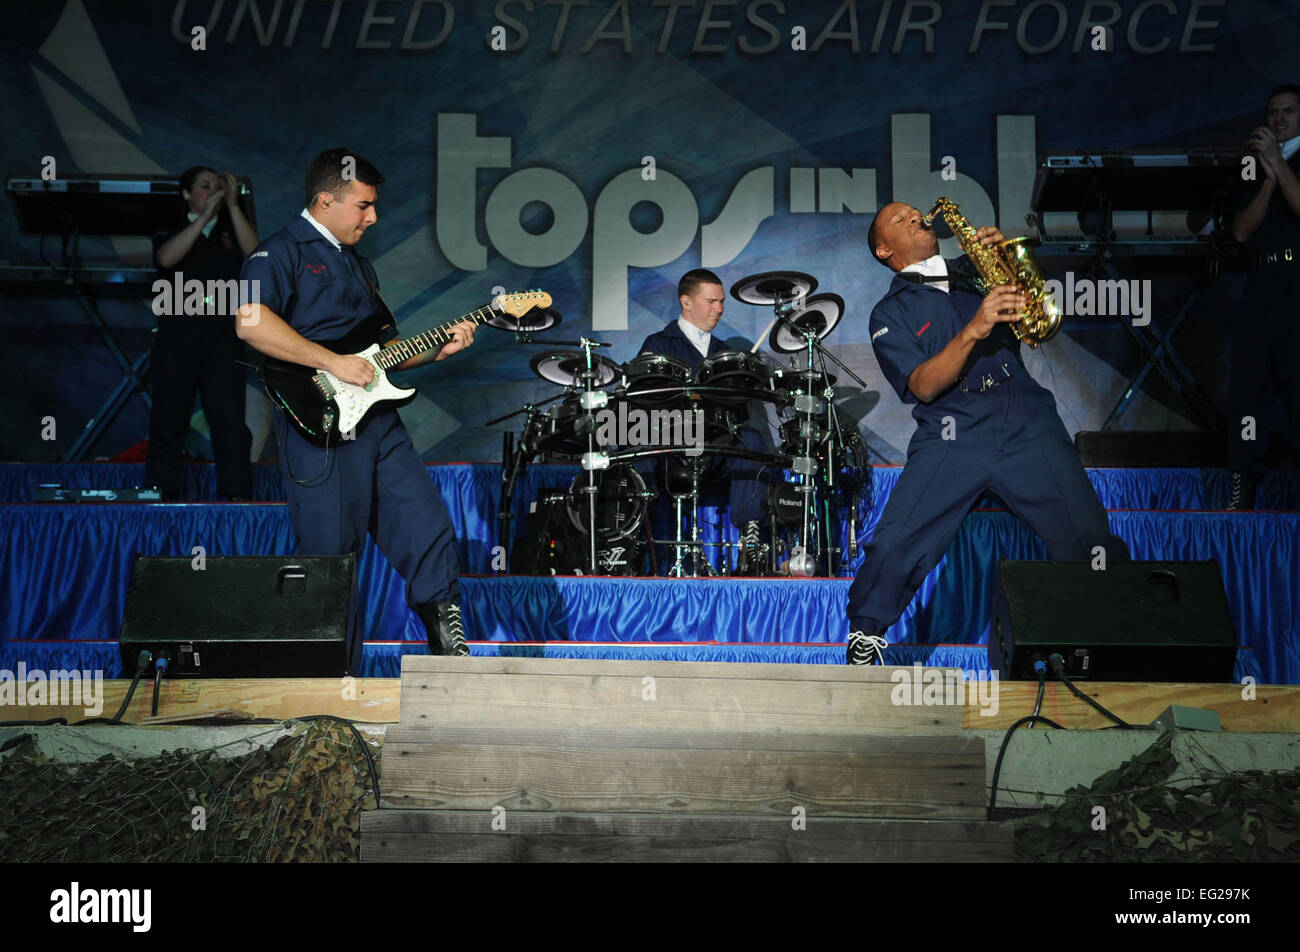 Senior Airman Kenneth Del Valle Ruiz, front left, and Airman 1st Class Wynton Warren, front right, have an instrument duel during a Tops in Blue performance at Bagram Airfield, Afghanistan, Dec. 24, 2012. Tops in Blue serves as an expeditionary entertainment unit that provides quality entertainment to personnel stationed worldwide at remote and deployed locations.  Staff Sgt. David Dobrydney Stock Photo